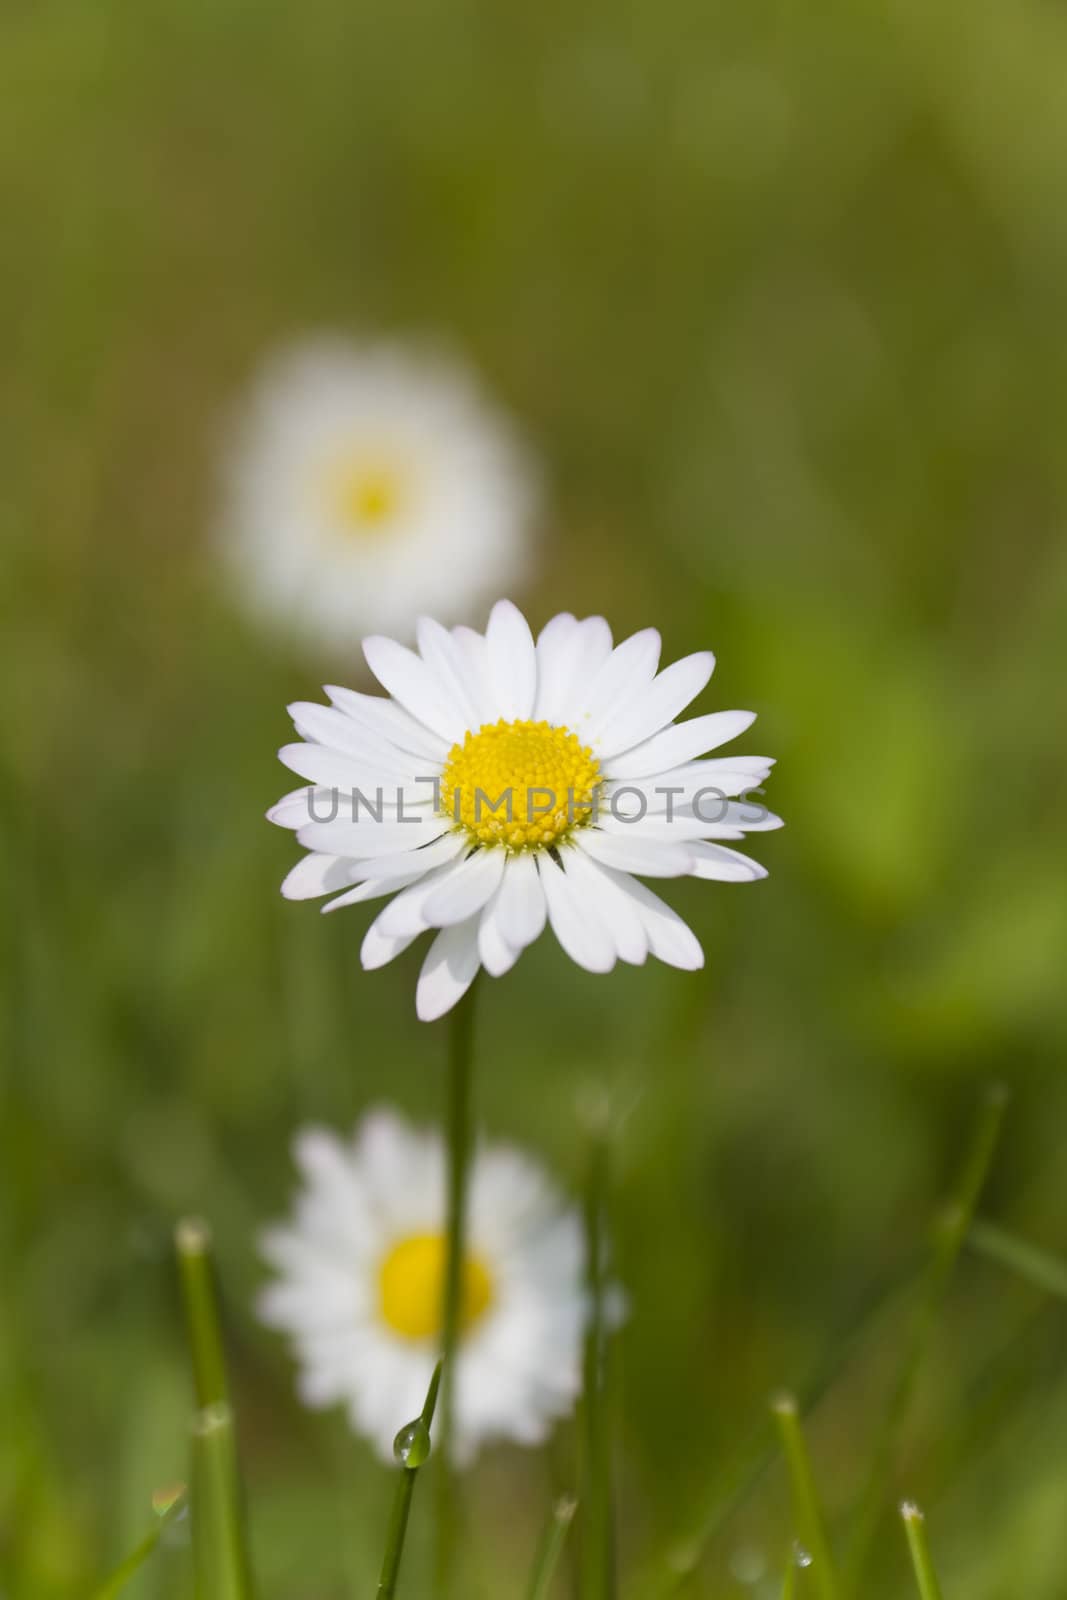 This image shows a macro from little daisy